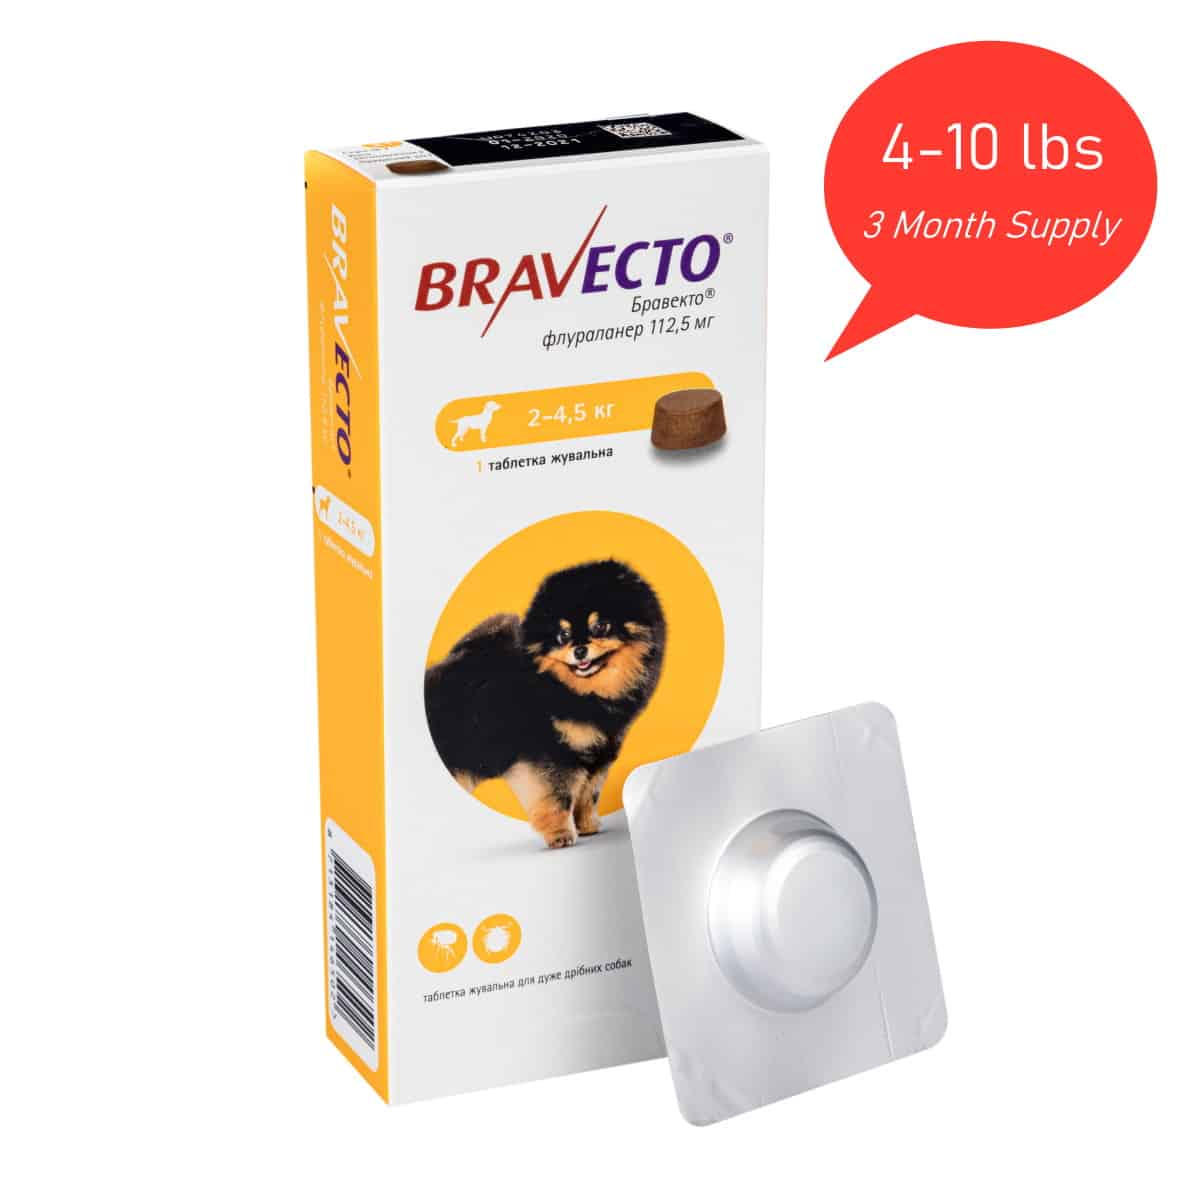 Bravecto Chews for Dogs 4-10lbs